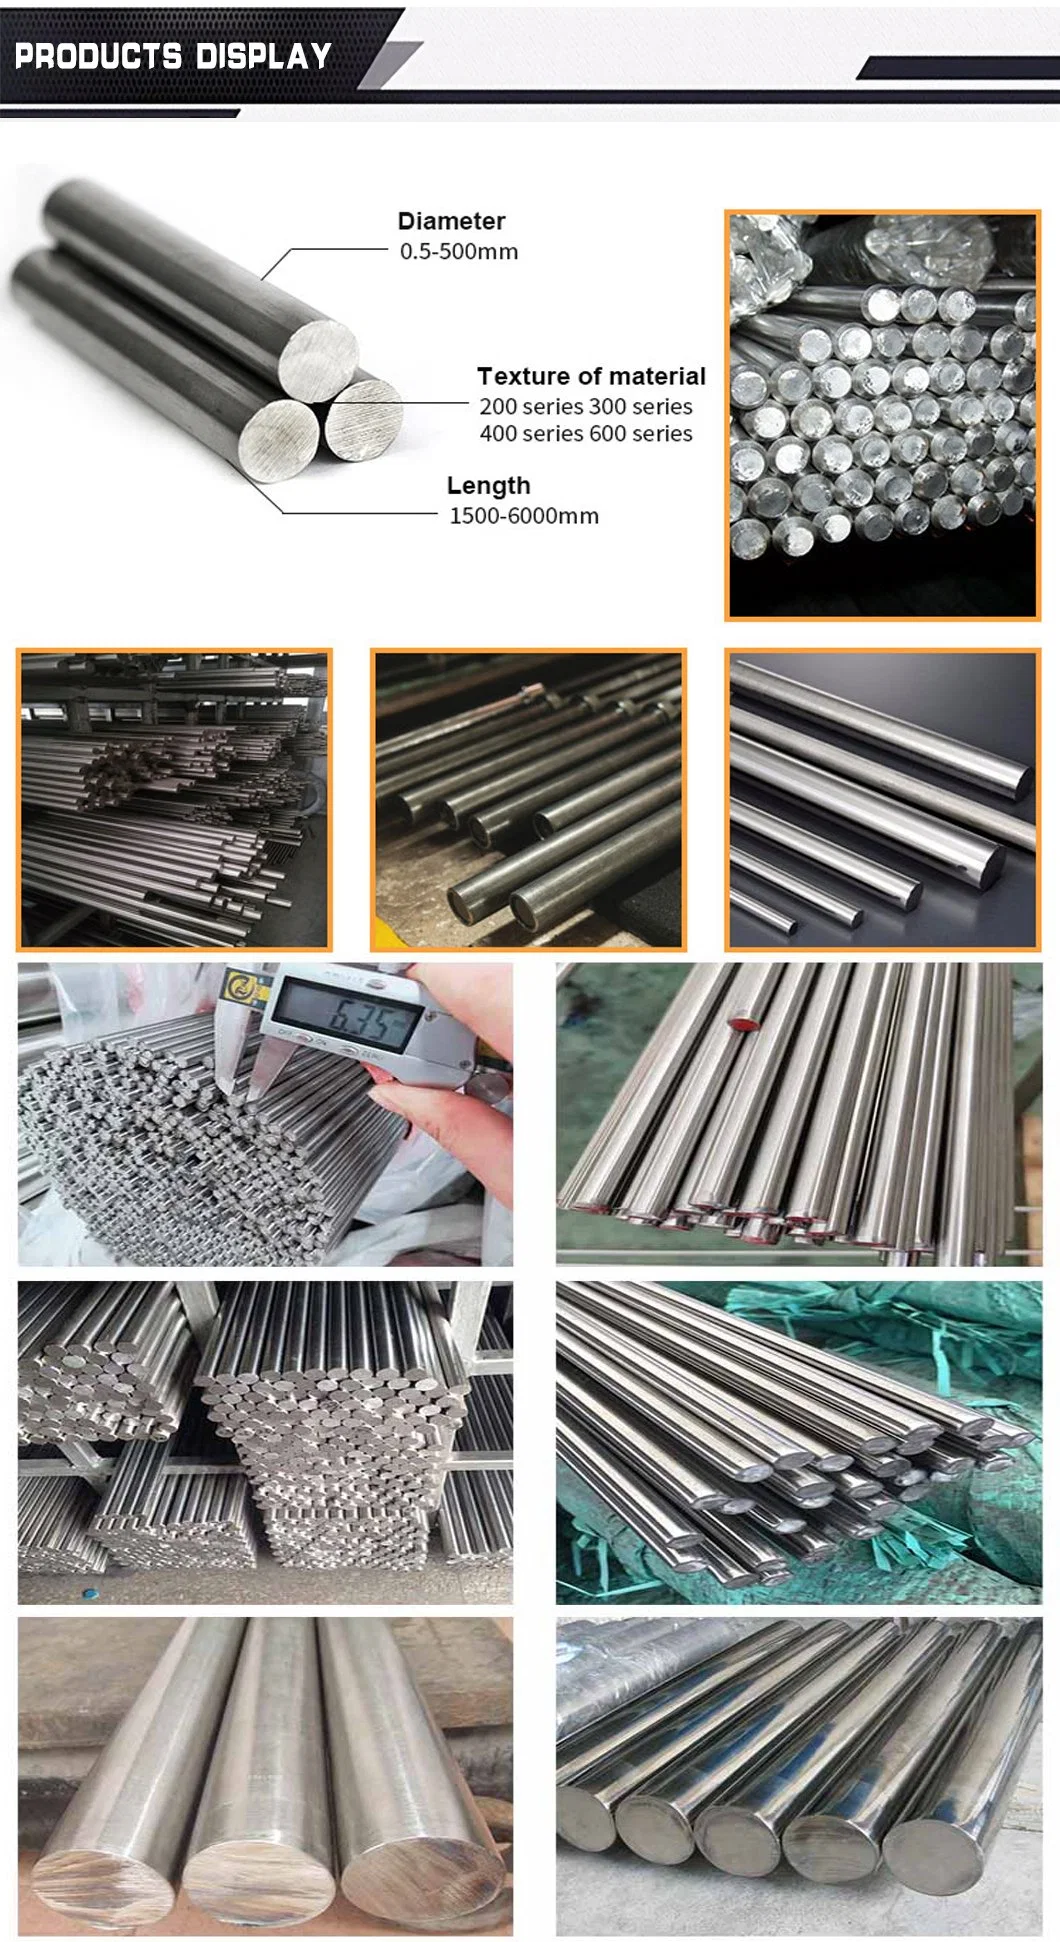 AISI JIS En304 316L 310S 409 410 420 430 431 420f 430f 444 Stainless Steel Ss Round Bar ASTM A276 Stainless Steel Round Rod Bar